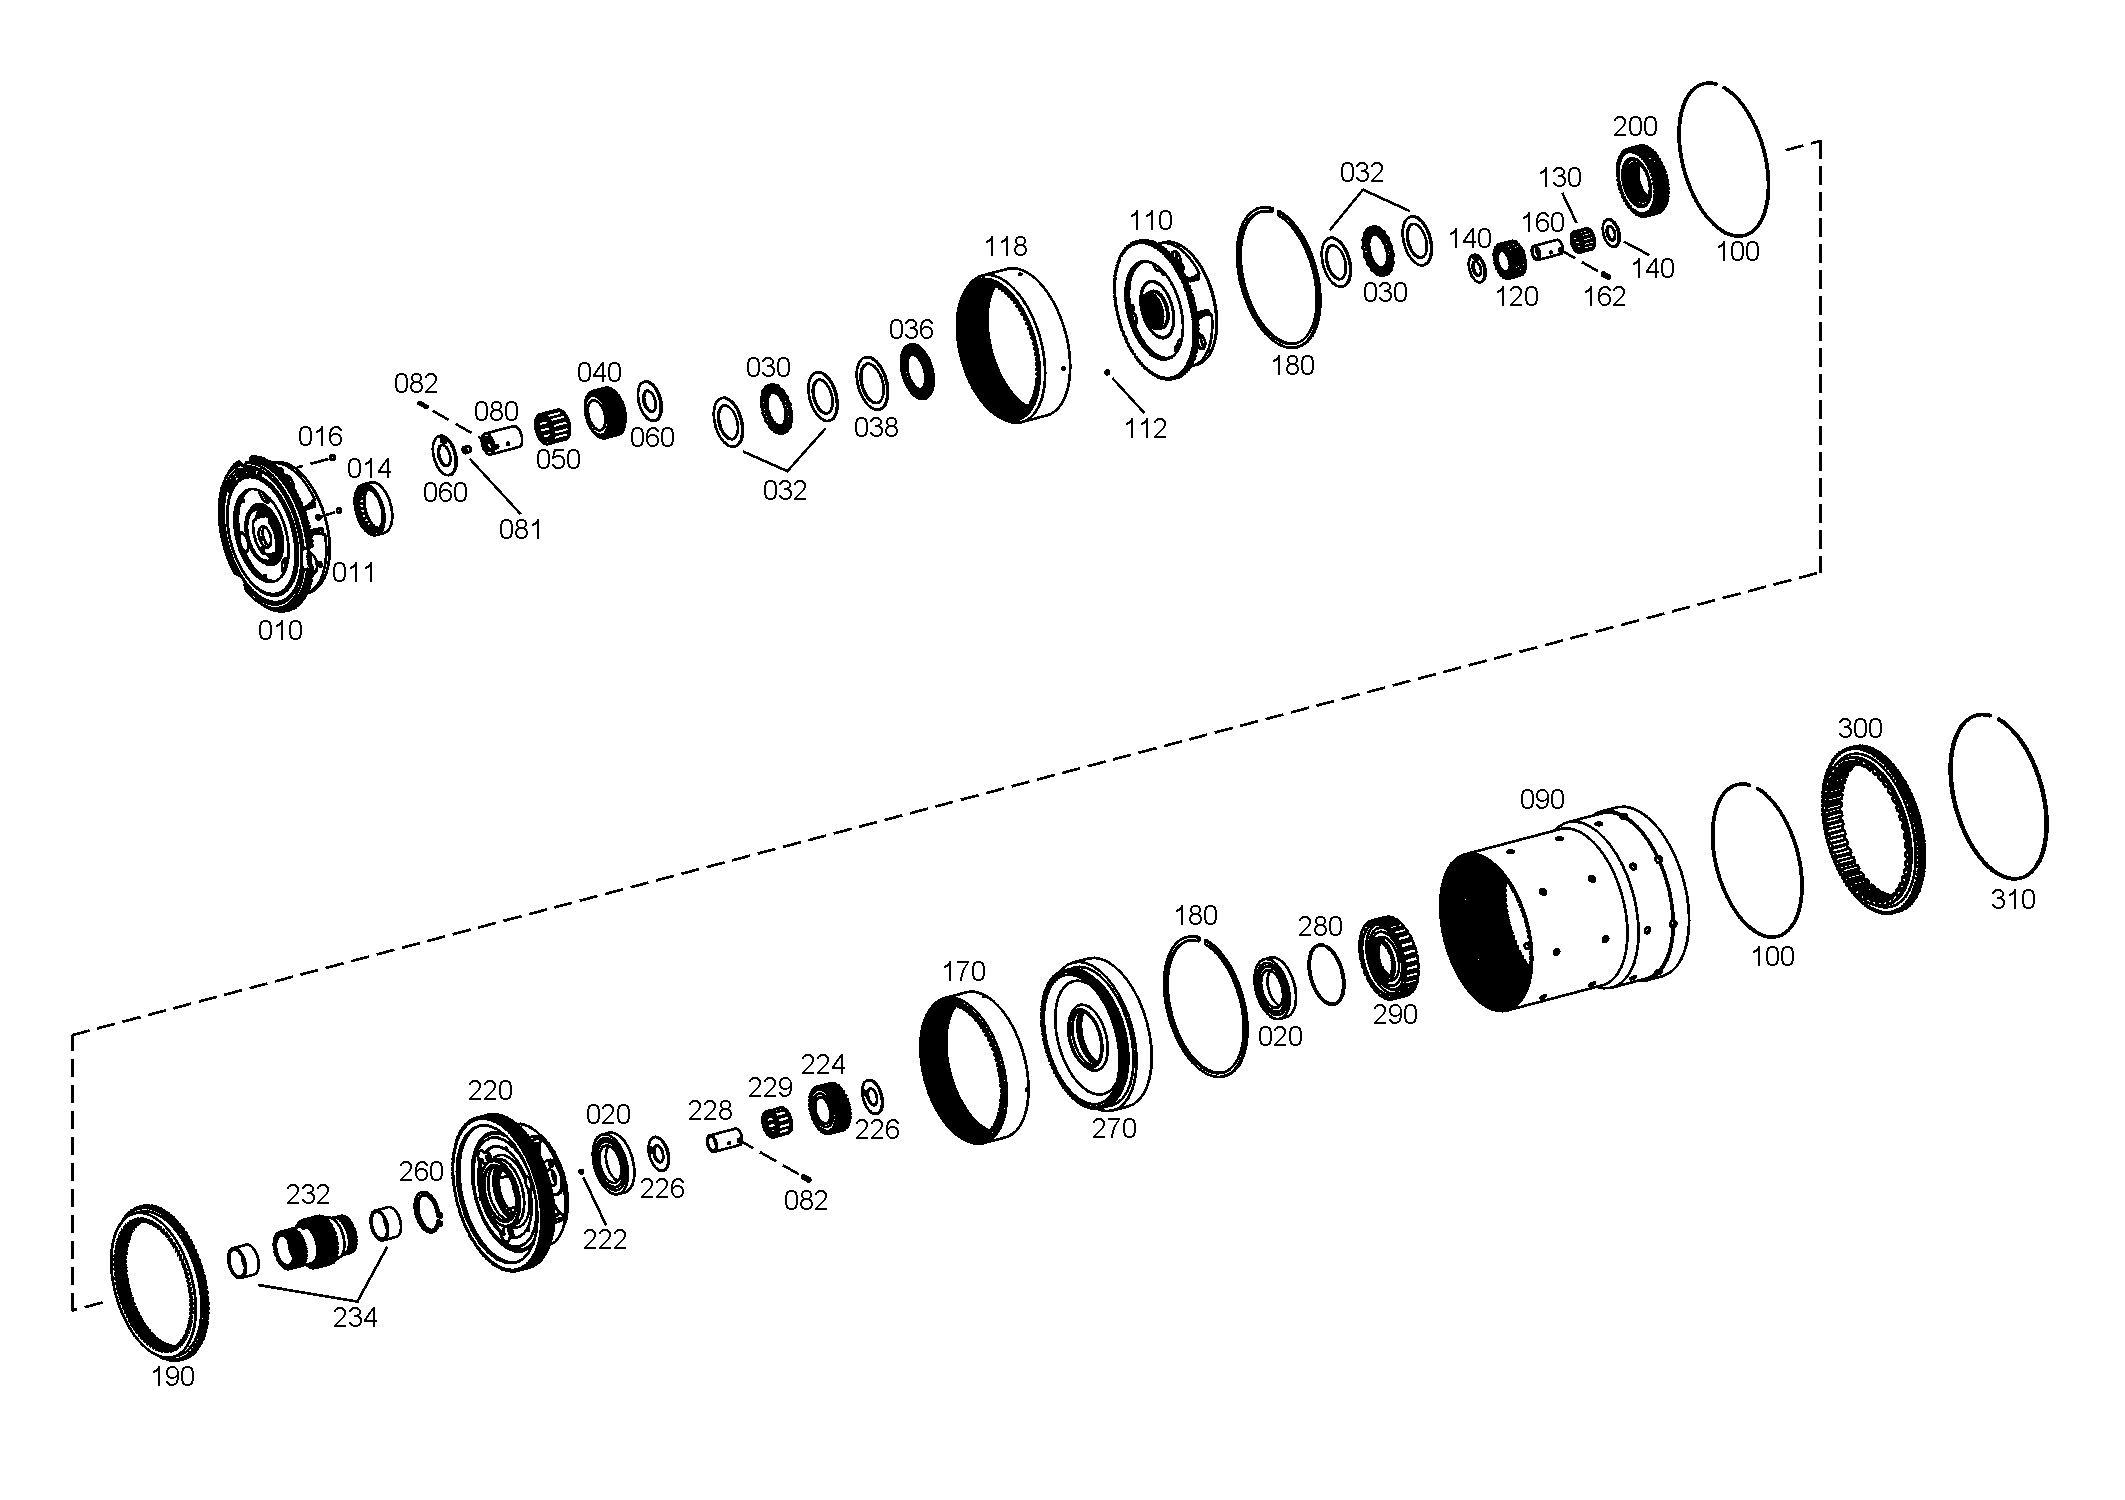 drawing for BEISSBARTH & MUELLER GMBH & CO. 09397960 - BALL BEARING (figure 2)